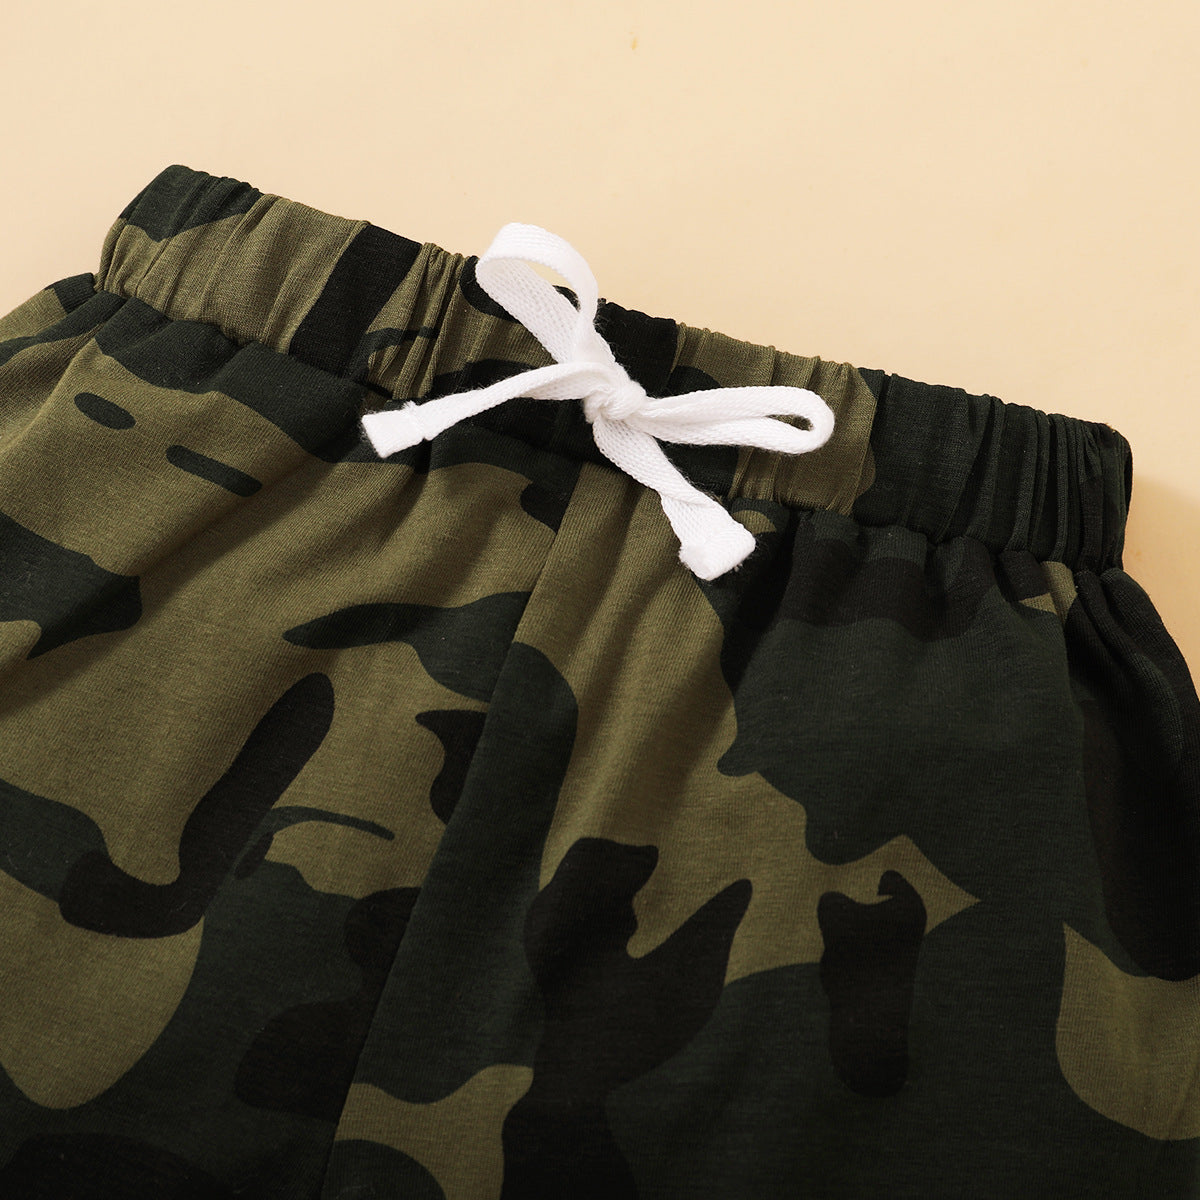 2PCS COOLER VERSION OF DAD Letter Printed Hoodie with Camo Pants Baby Set